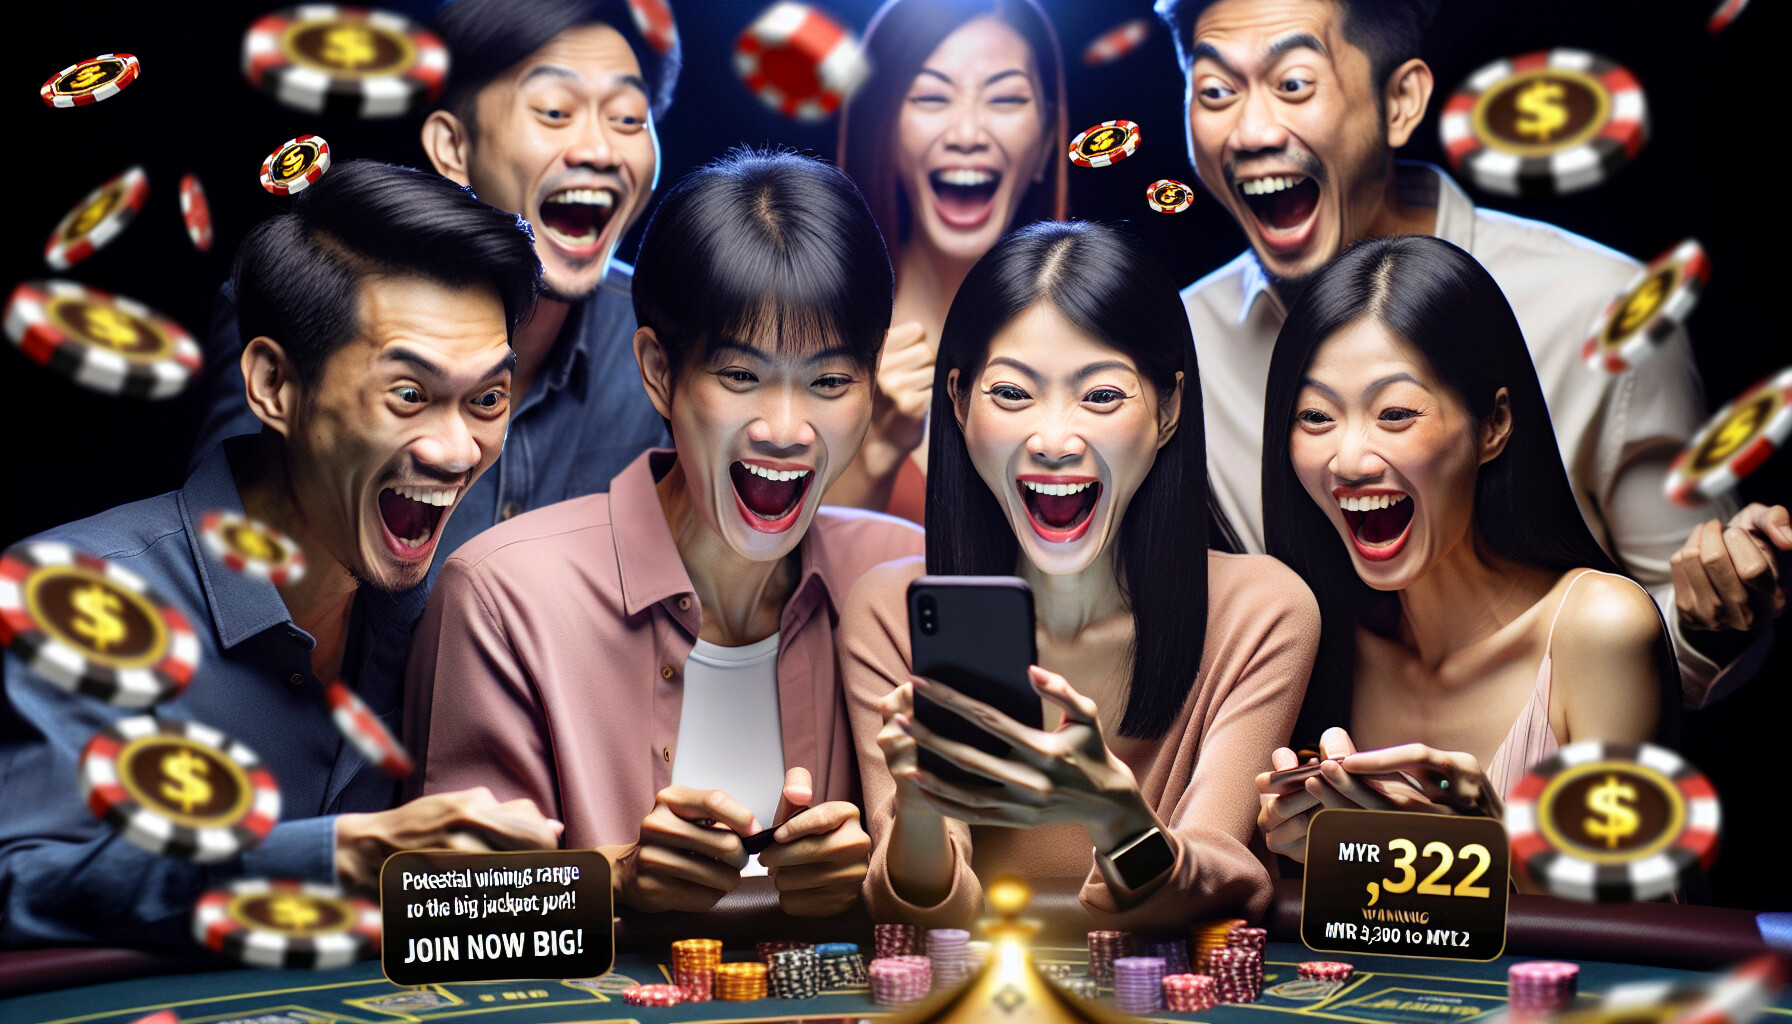  Spin to Win with 918kiss Golden Slot! Win up to MYR 3,321 in Myr 300 Bet - Join the Casino Fun Now! 